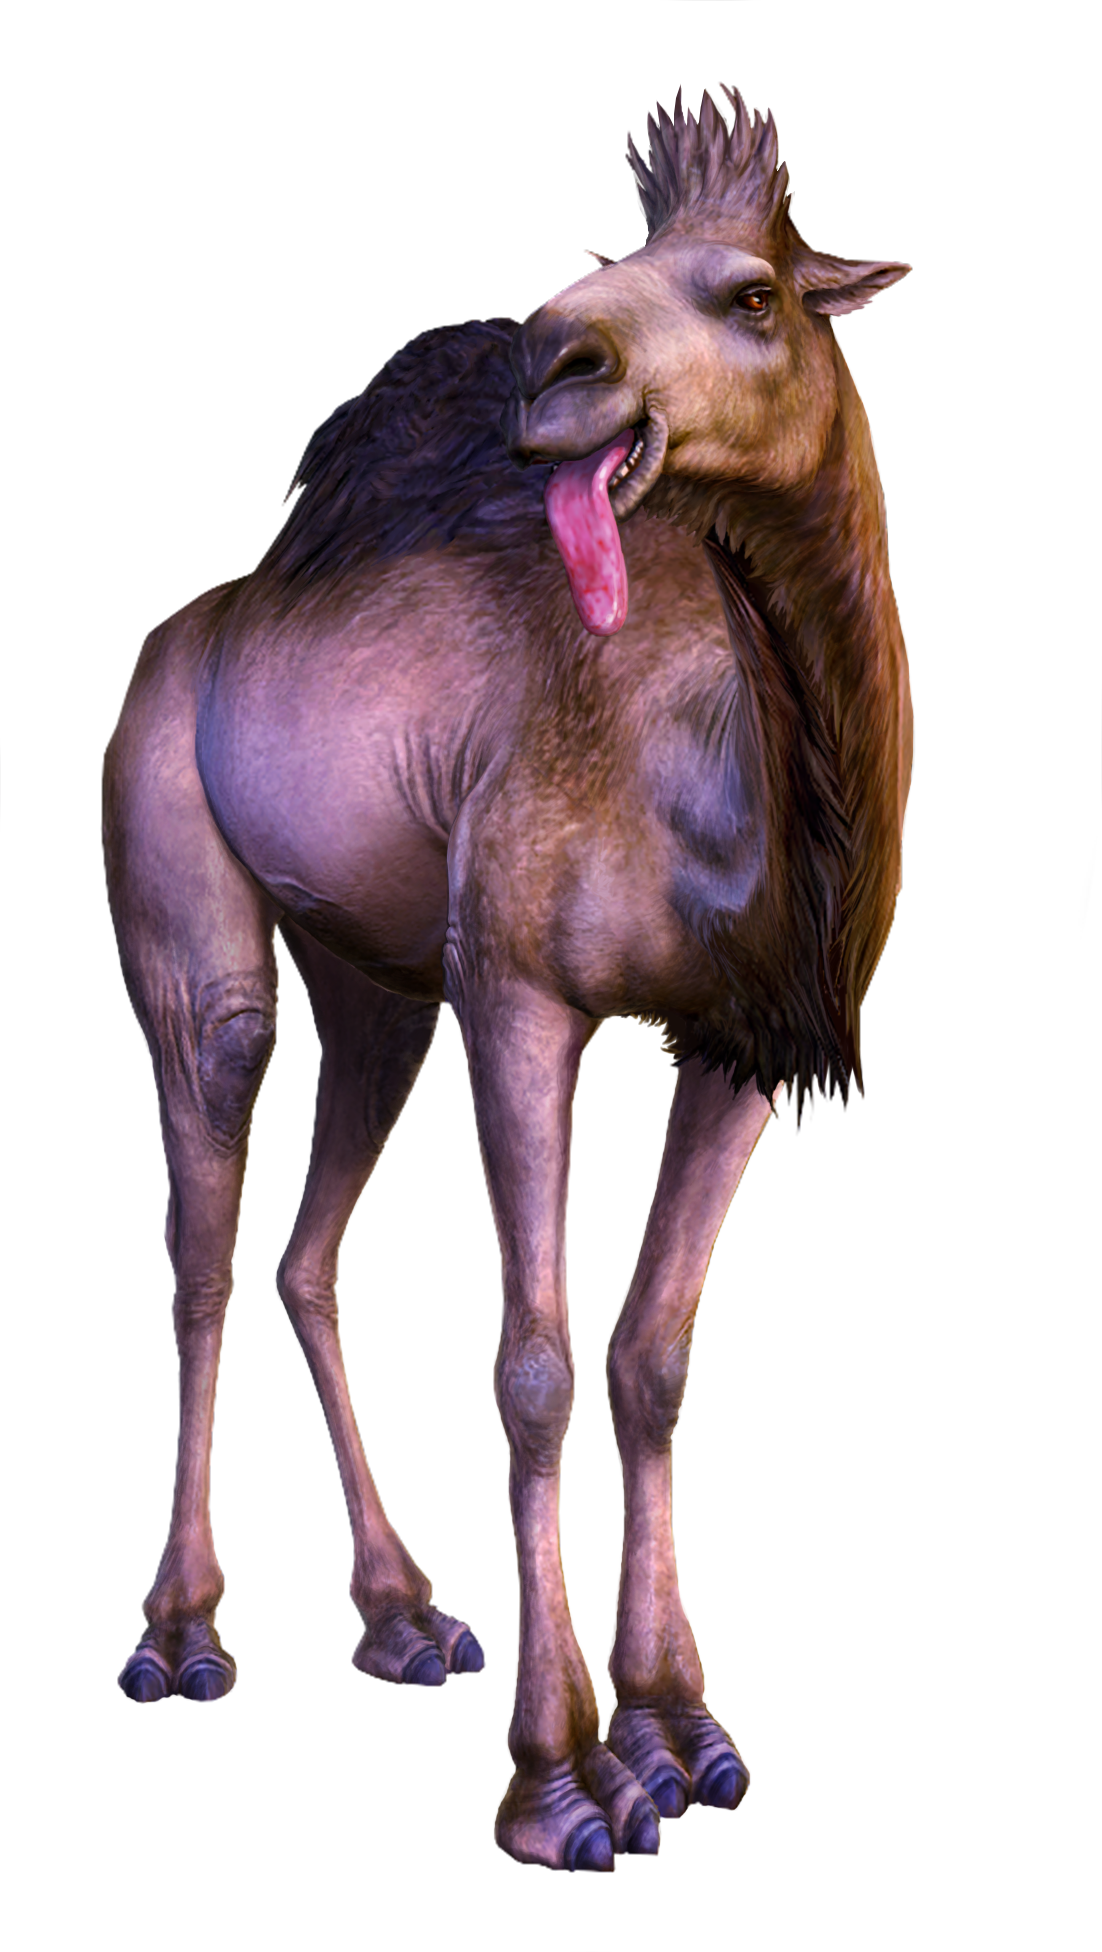 A Camel With Its Tongue Out